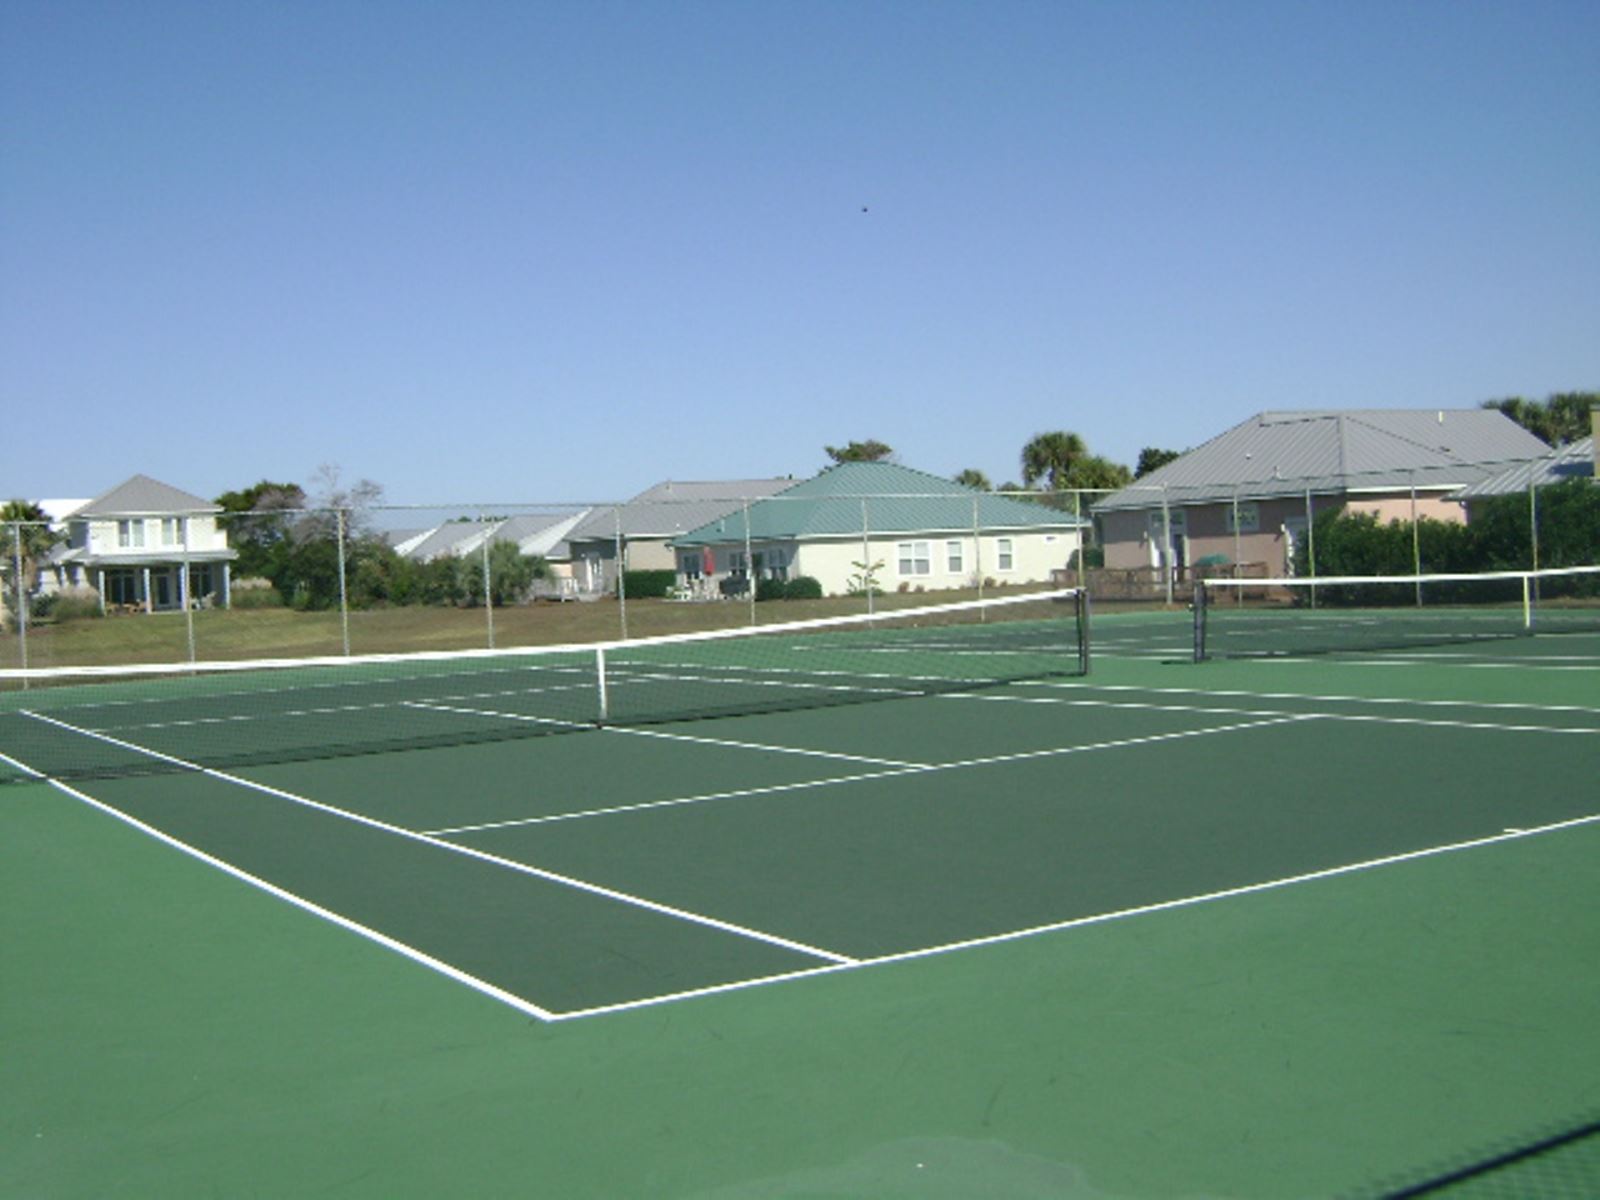 Free tennis for Maravilla Guests. Two newly refinished courts. First come, first serve!